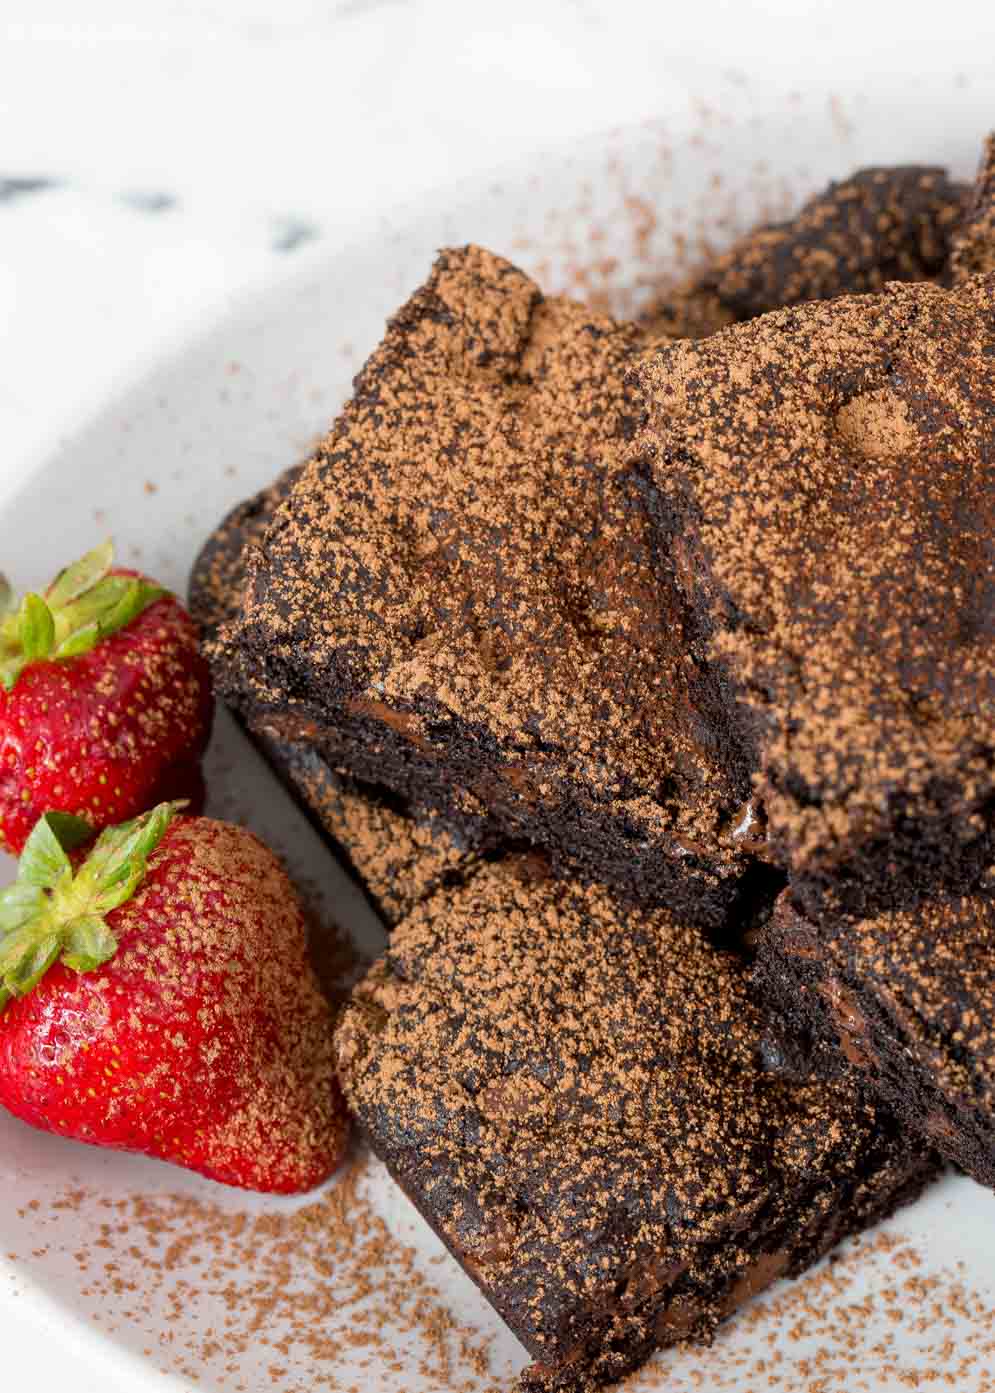 Plate of Vegan Brownies with strawberries on the side